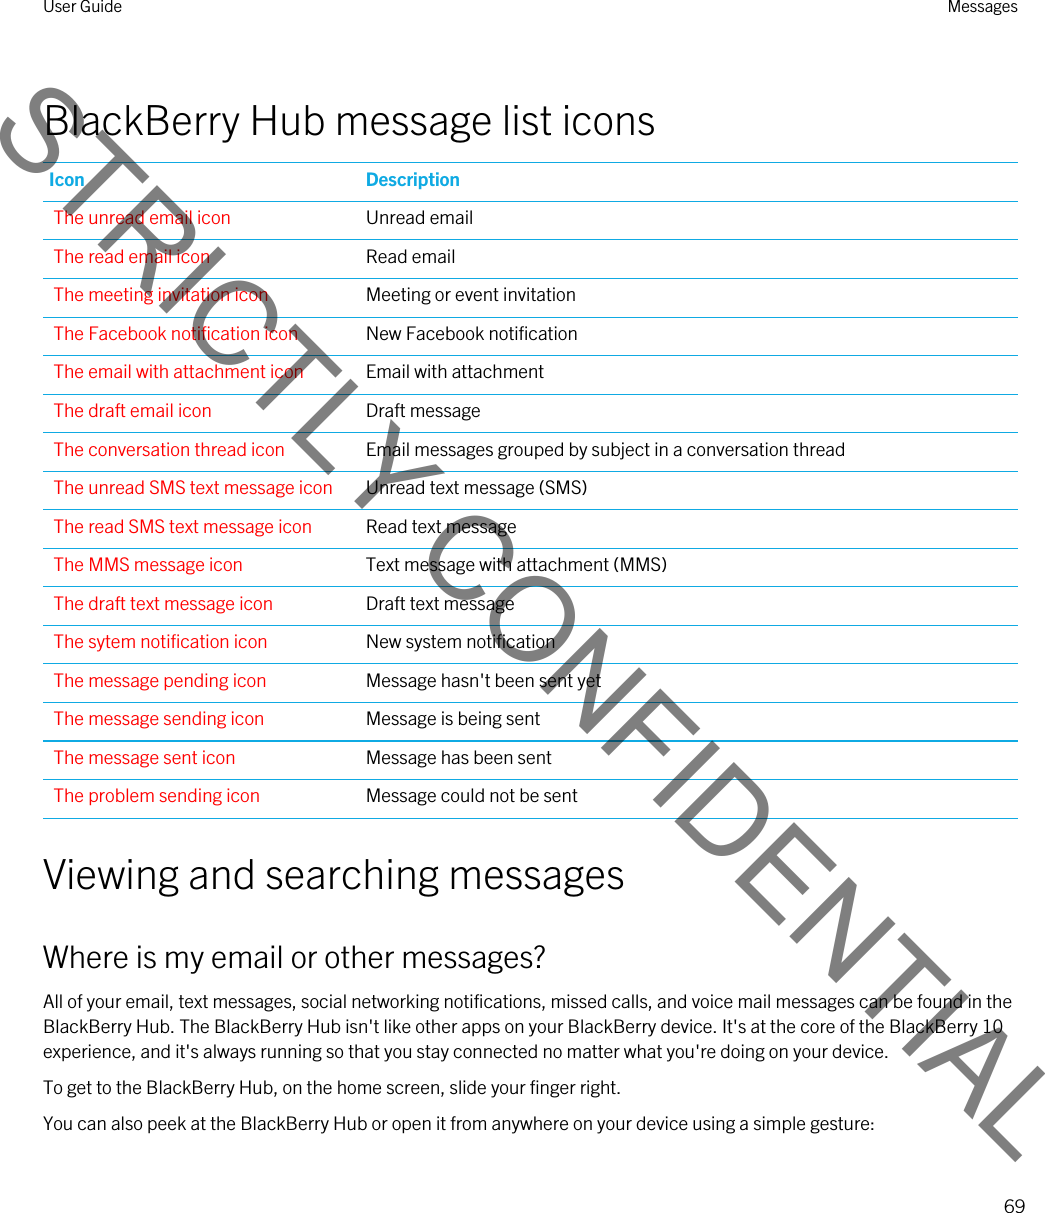 BlackBerry Hub message list iconsIcon DescriptionThe unread email icon Unread emailThe read email icon Read emailThe meeting invitation icon Meeting or event invitationThe Facebook notification icon New Facebook notificationThe email with attachment icon Email with attachmentThe draft email icon Draft messageThe conversation thread icon Email messages grouped by subject in a conversation threadThe unread SMS text message icon Unread text message (SMS)The read SMS text message icon Read text messageThe MMS message icon Text message with attachment (MMS)The draft text message icon Draft text messageThe sytem notification icon New system notificationThe message pending icon Message hasn&apos;t been sent yetThe message sending icon Message is being sentThe message sent icon Message has been sentThe problem sending icon Message could not be sentViewing and searching messagesWhere is my email or other messages?All of your email, text messages, social networking notifications, missed calls, and voice mail messages can be found in the BlackBerry Hub. The BlackBerry Hub isn&apos;t like other apps on your BlackBerry device. It&apos;s at the core of the BlackBerry 10 experience, and it&apos;s always running so that you stay connected no matter what you&apos;re doing on your device.To get to the BlackBerry Hub, on the home screen, slide your finger right.You can also peek at the BlackBerry Hub or open it from anywhere on your device using a simple gesture: User Guide Messages69STRICTLY CONFIDENTIAL